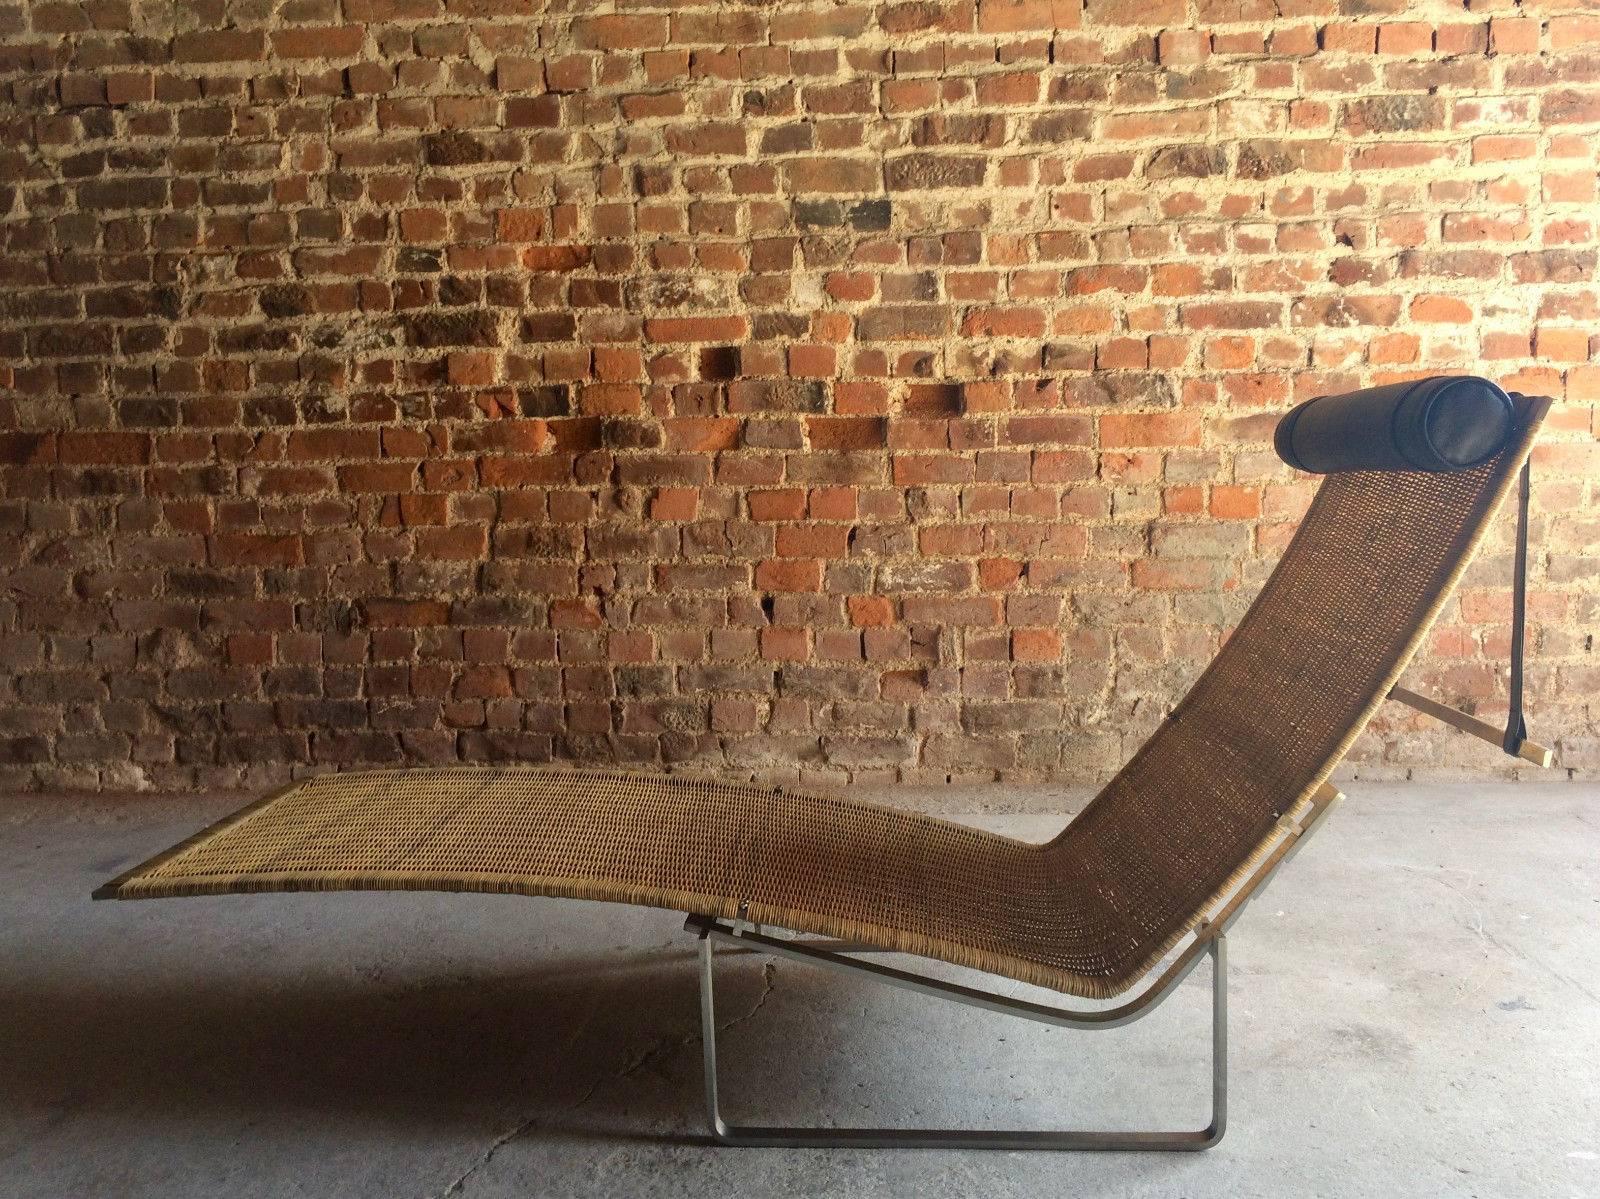 Stunning Poul Kjærholm Style Chaise Longue Lounger Model no. PK24 Bauhaus No.1 In Excellent Condition In Longdon, Tewkesbury